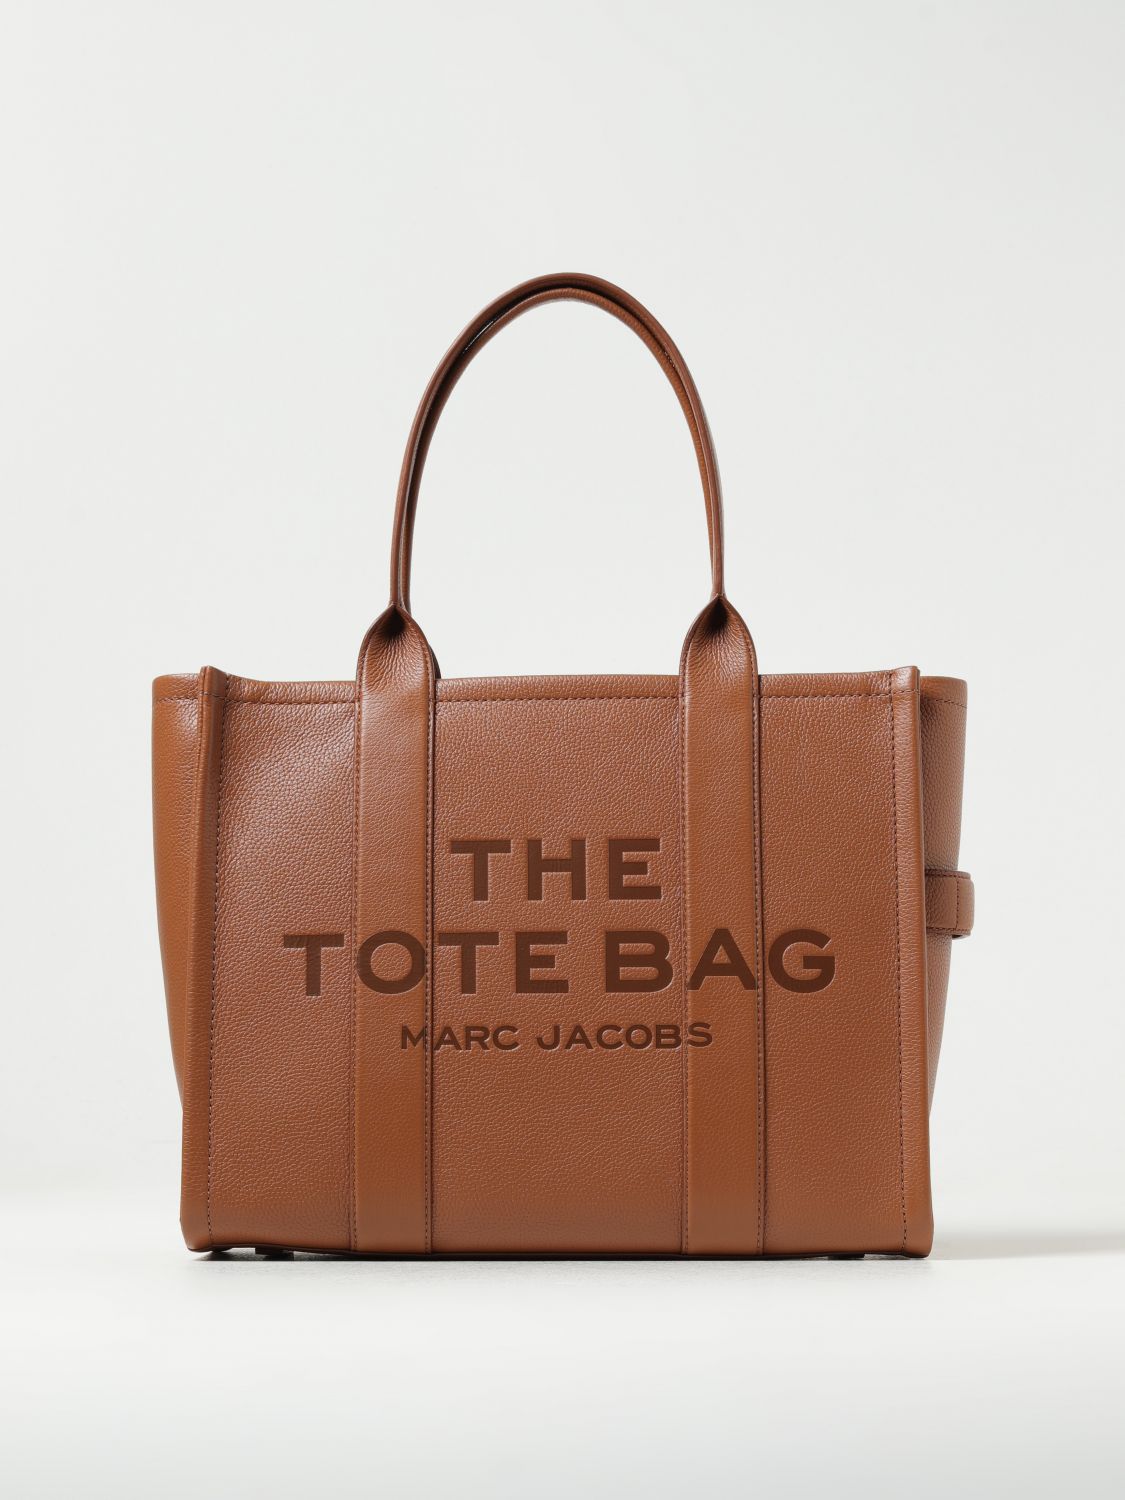 MARC JACOBS THE LARGE TOTE BAG IN GRAINED LEATHER,F09981032